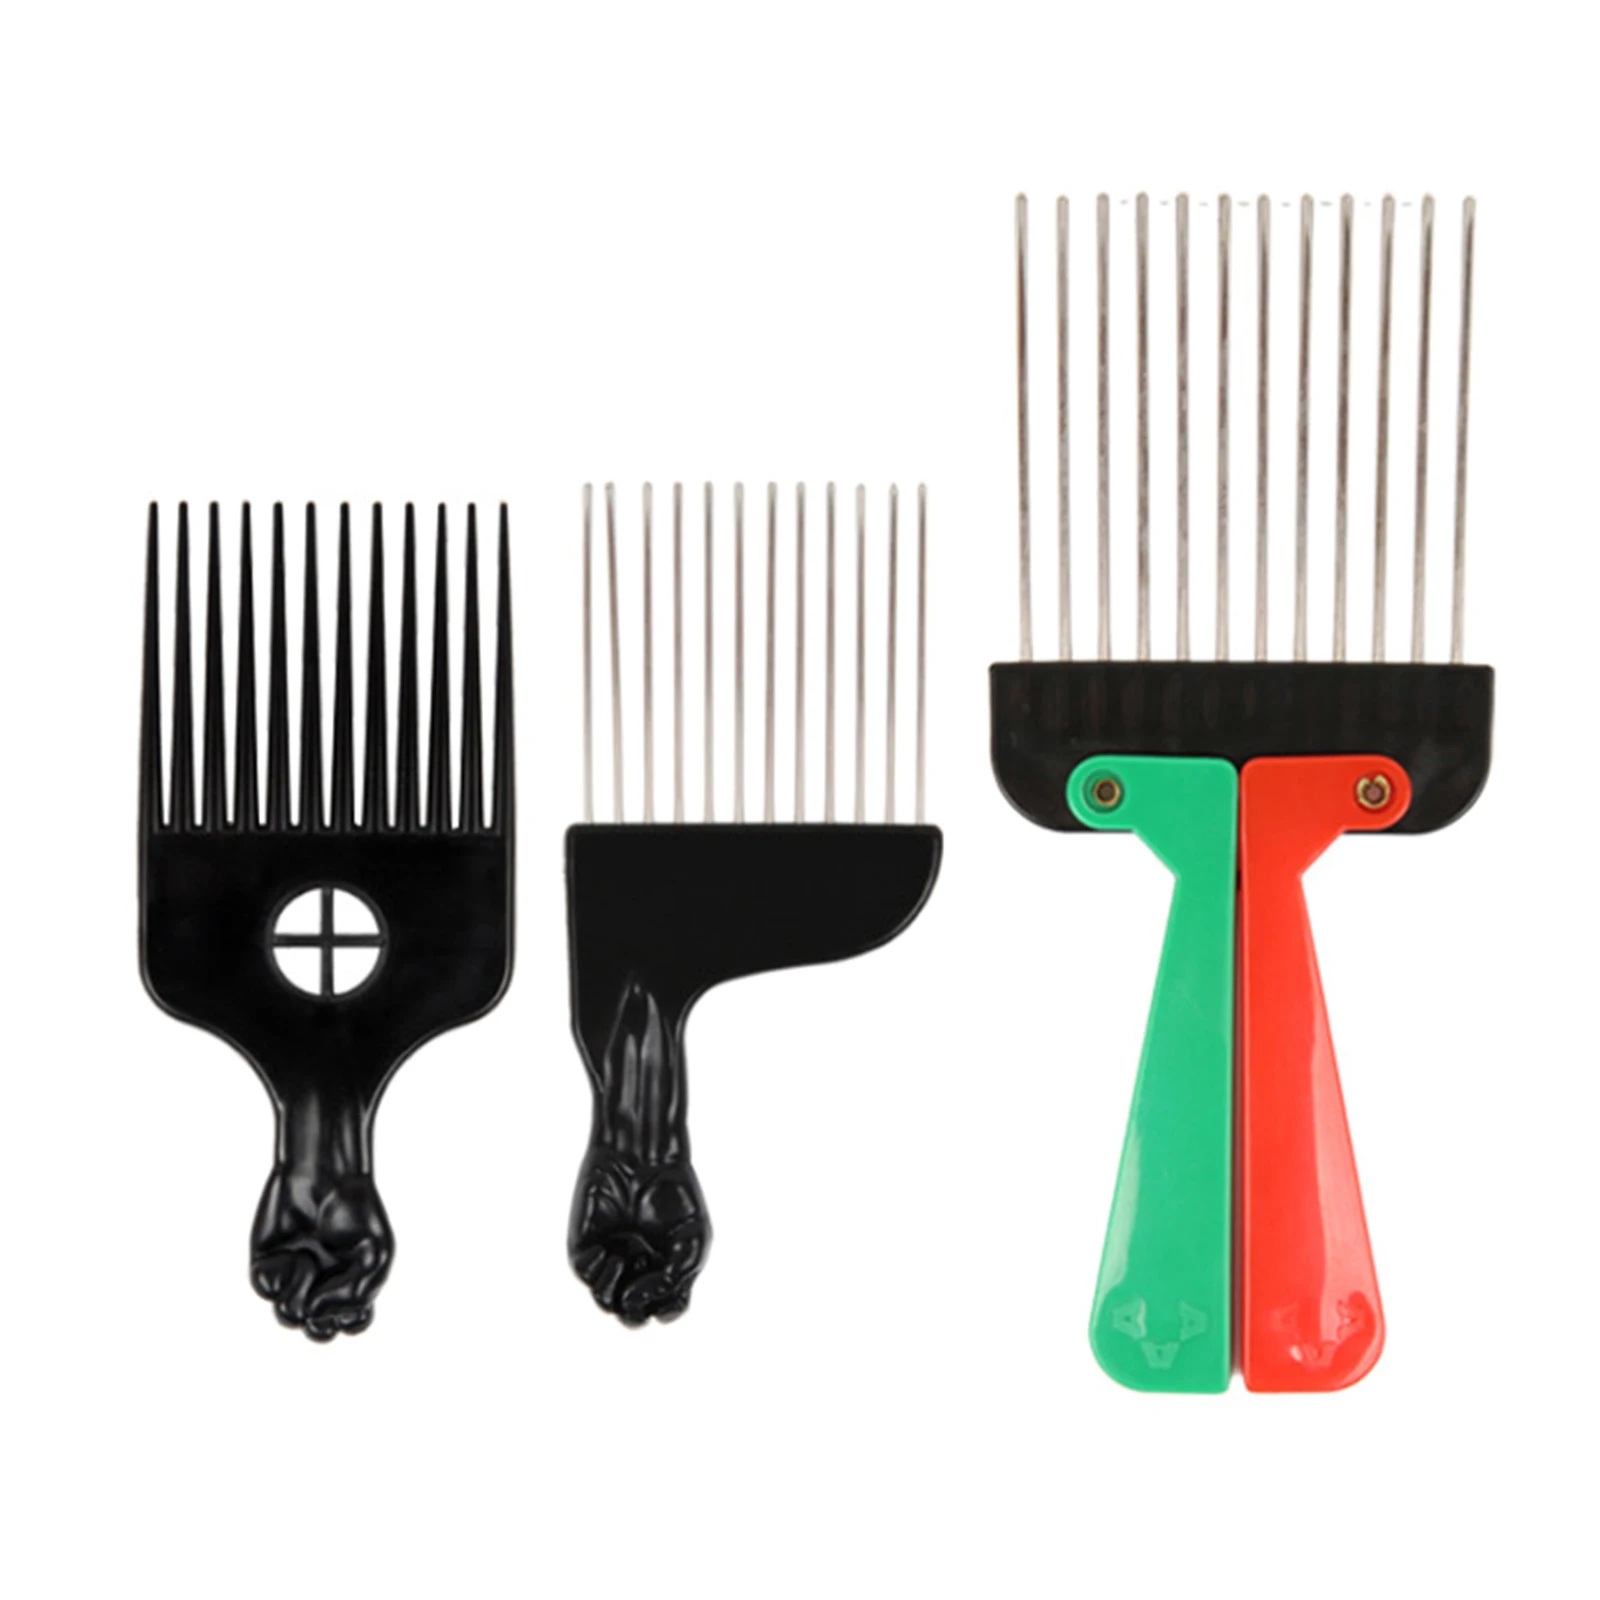 Afro Hair Pick for Hair Styling with Colour Foldable Handle for Salon